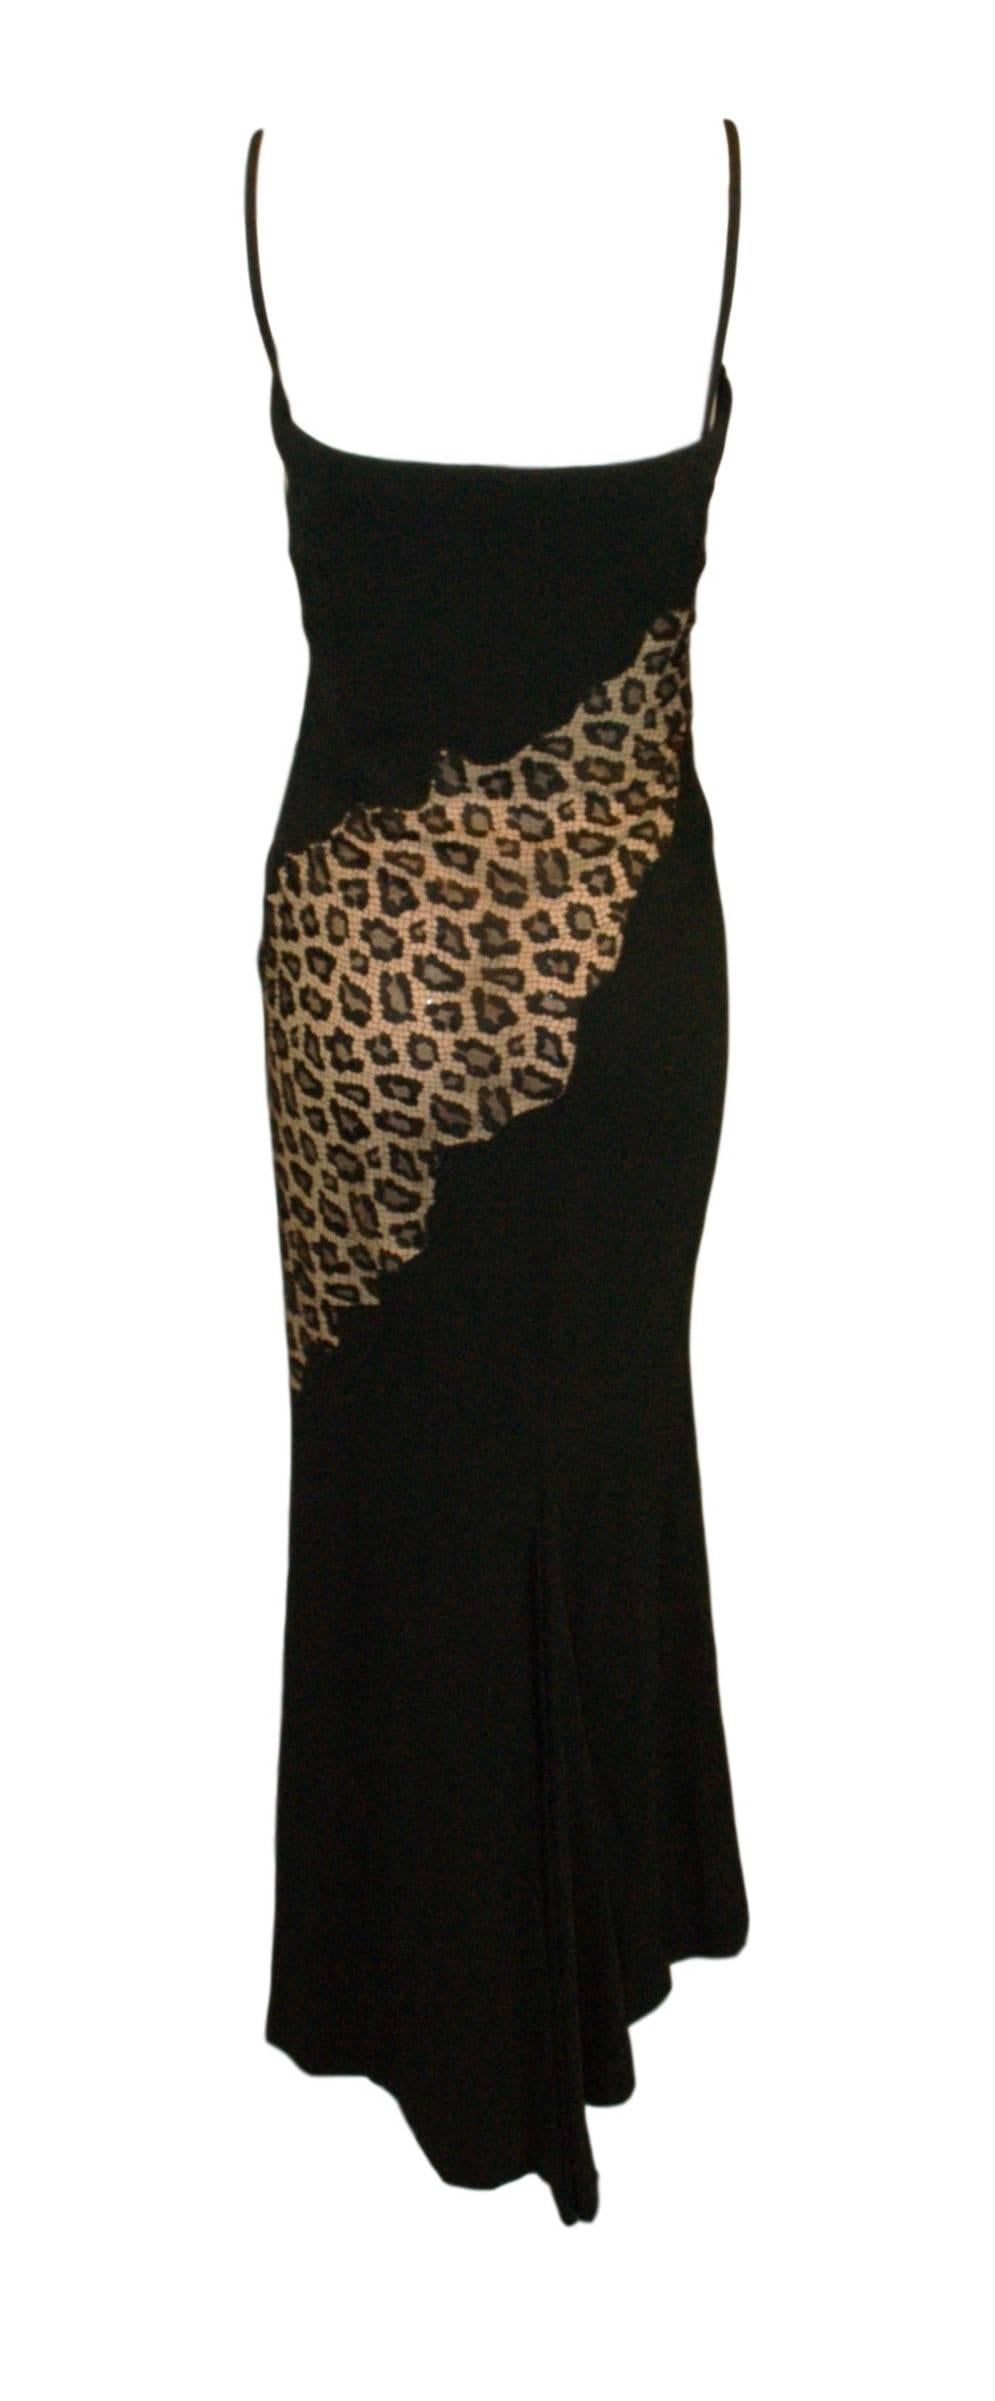 Women's Documented F/W 1997 Runway Givenchy Couture by Alexander McQueen Leopard Dress